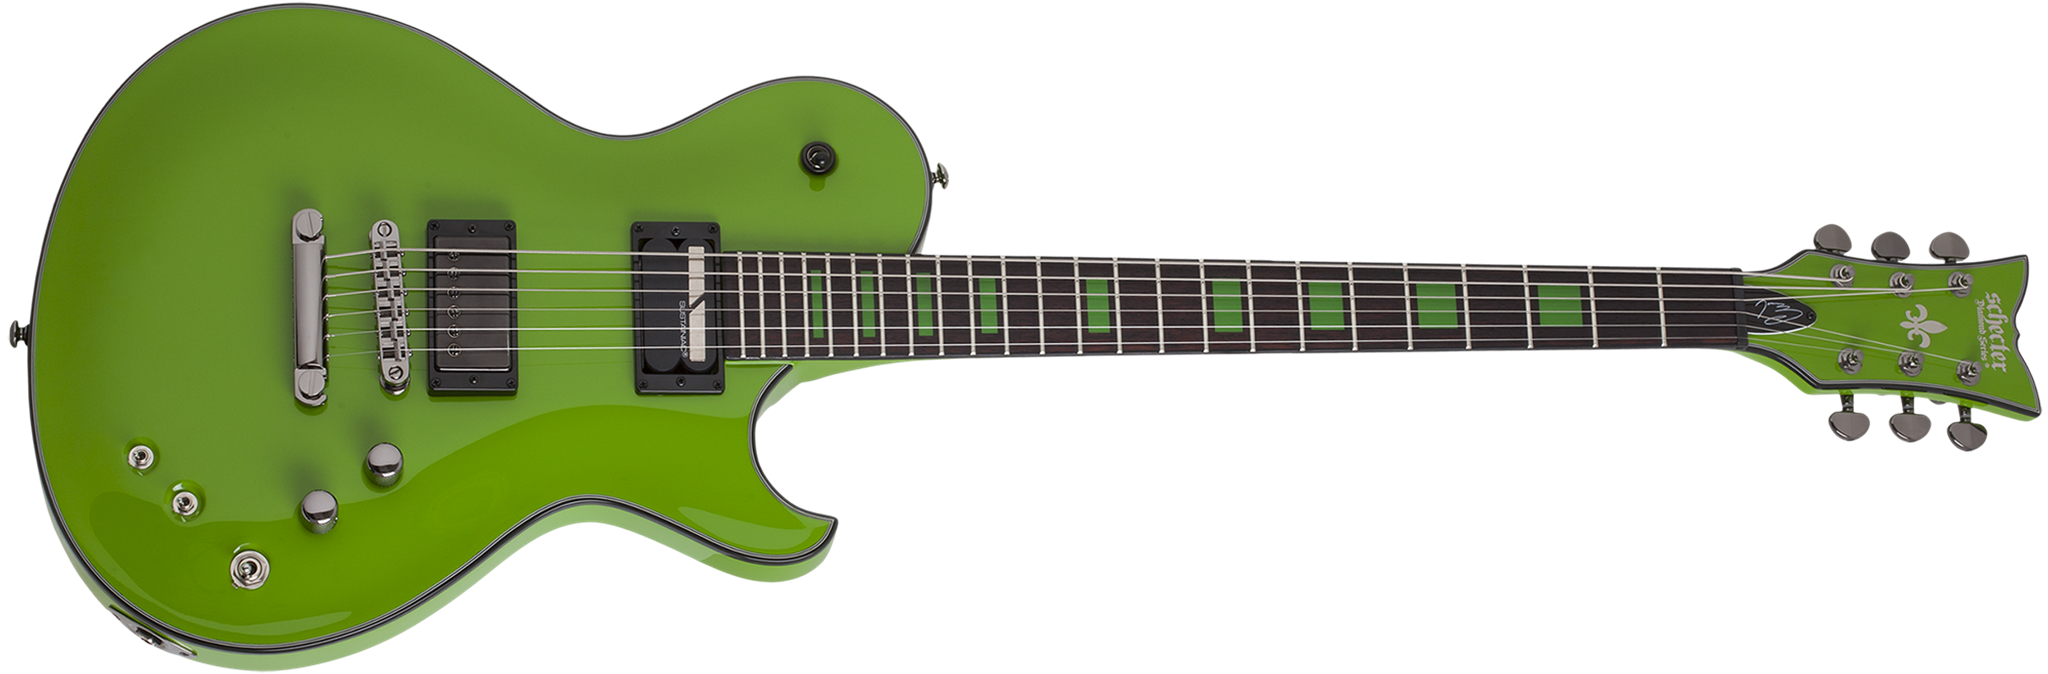 Schecter DIAMOND SERIES Kenny Hickey Solo-6 EX/S Steele Green 6-String Electric Guitar  